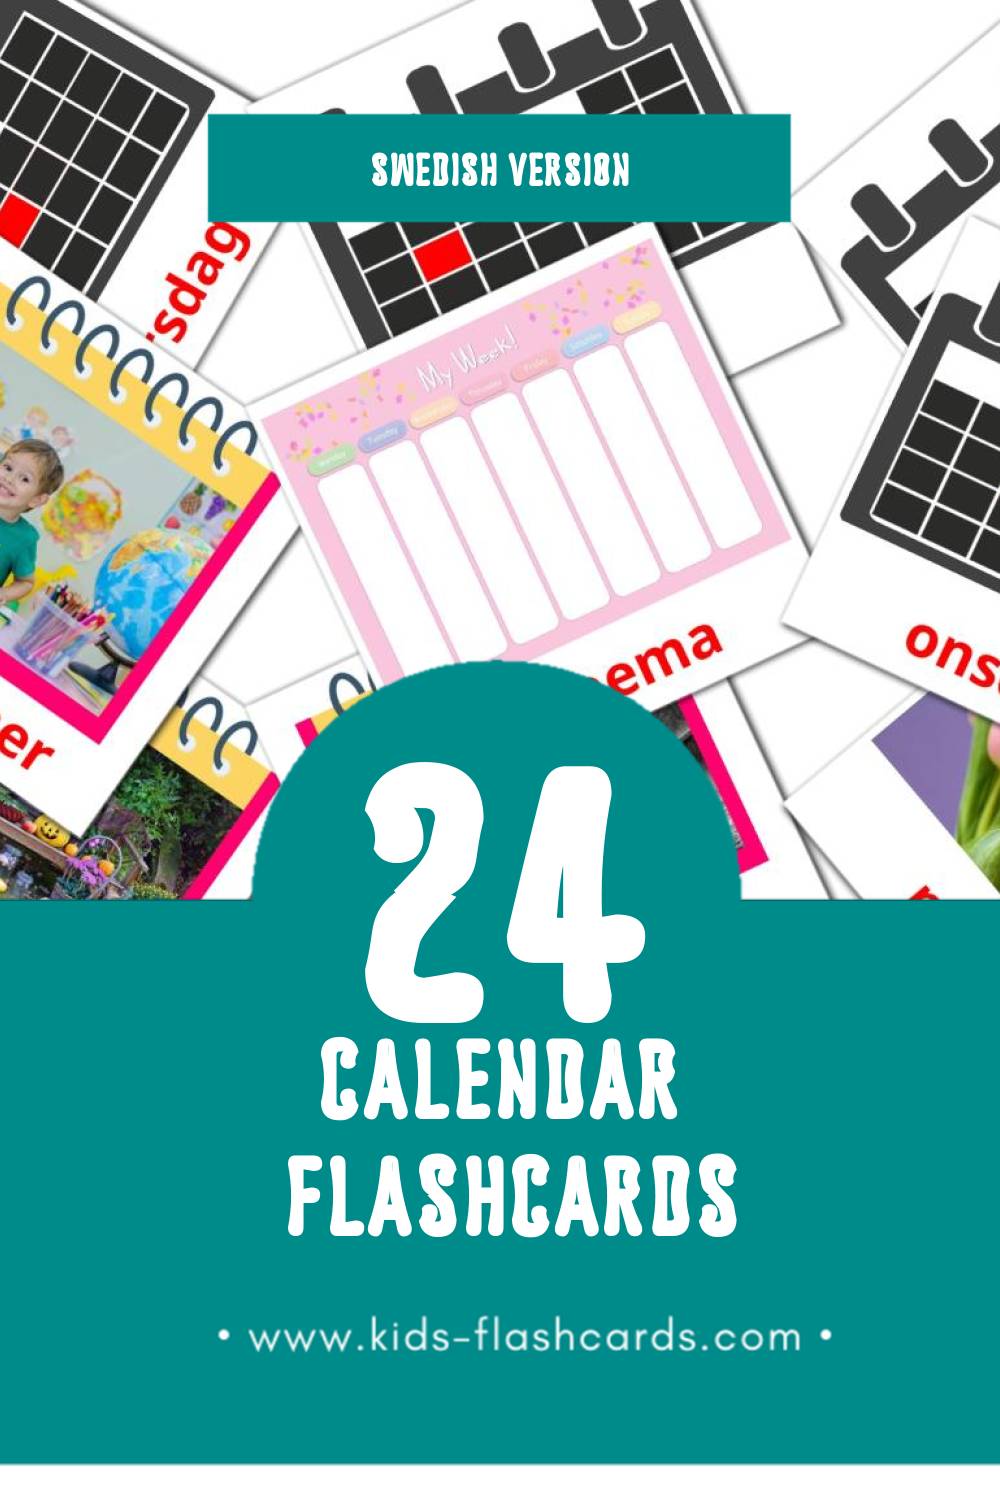 Visual Kalender Flashcards for Toddlers (12 cards in Swedish)